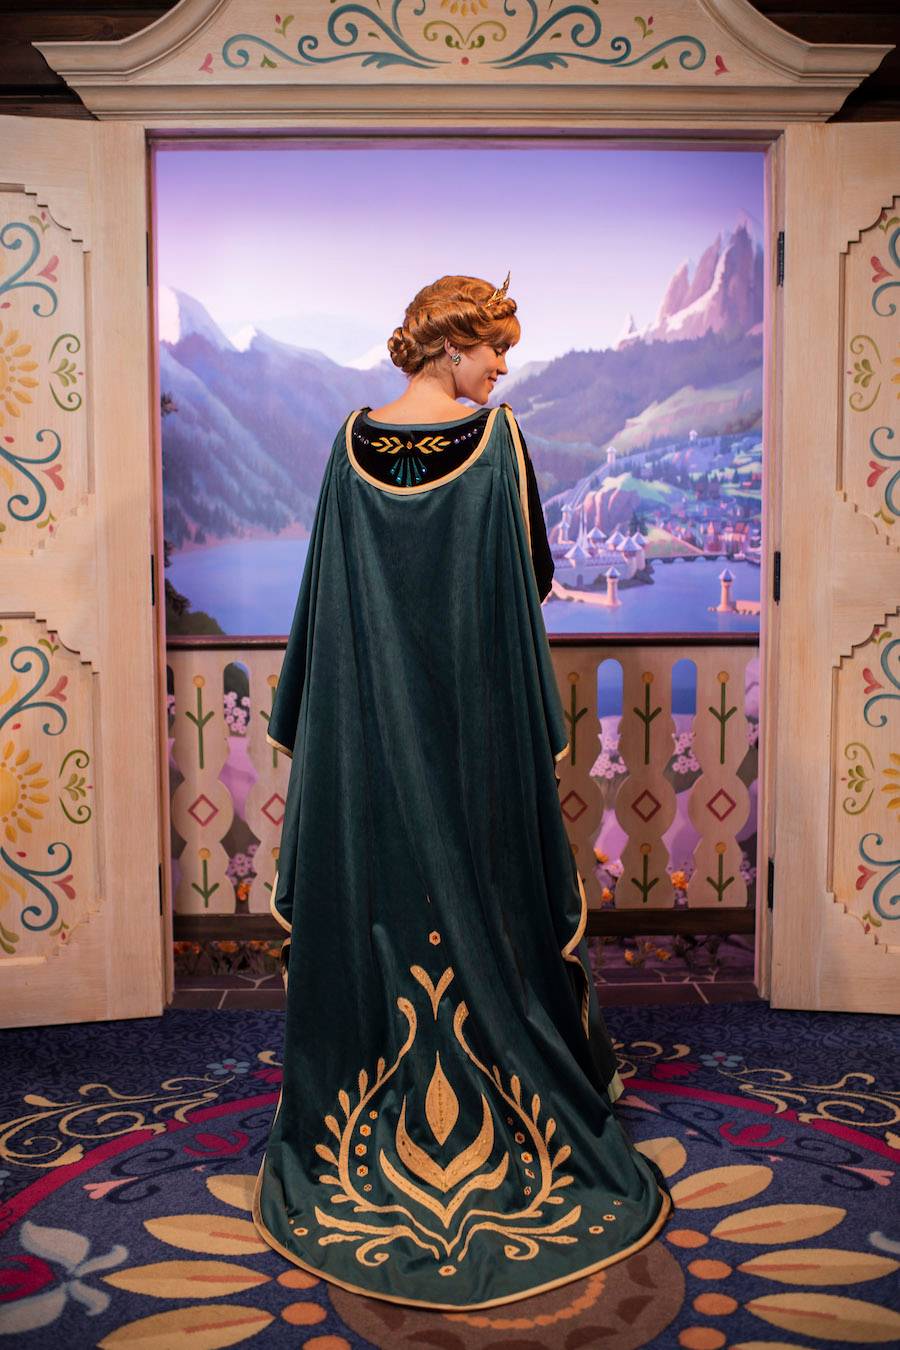 VIDEO - New Frozen 2 inspired royal attire for Anna and Elsa at the Royal Sommerhus in Epcot